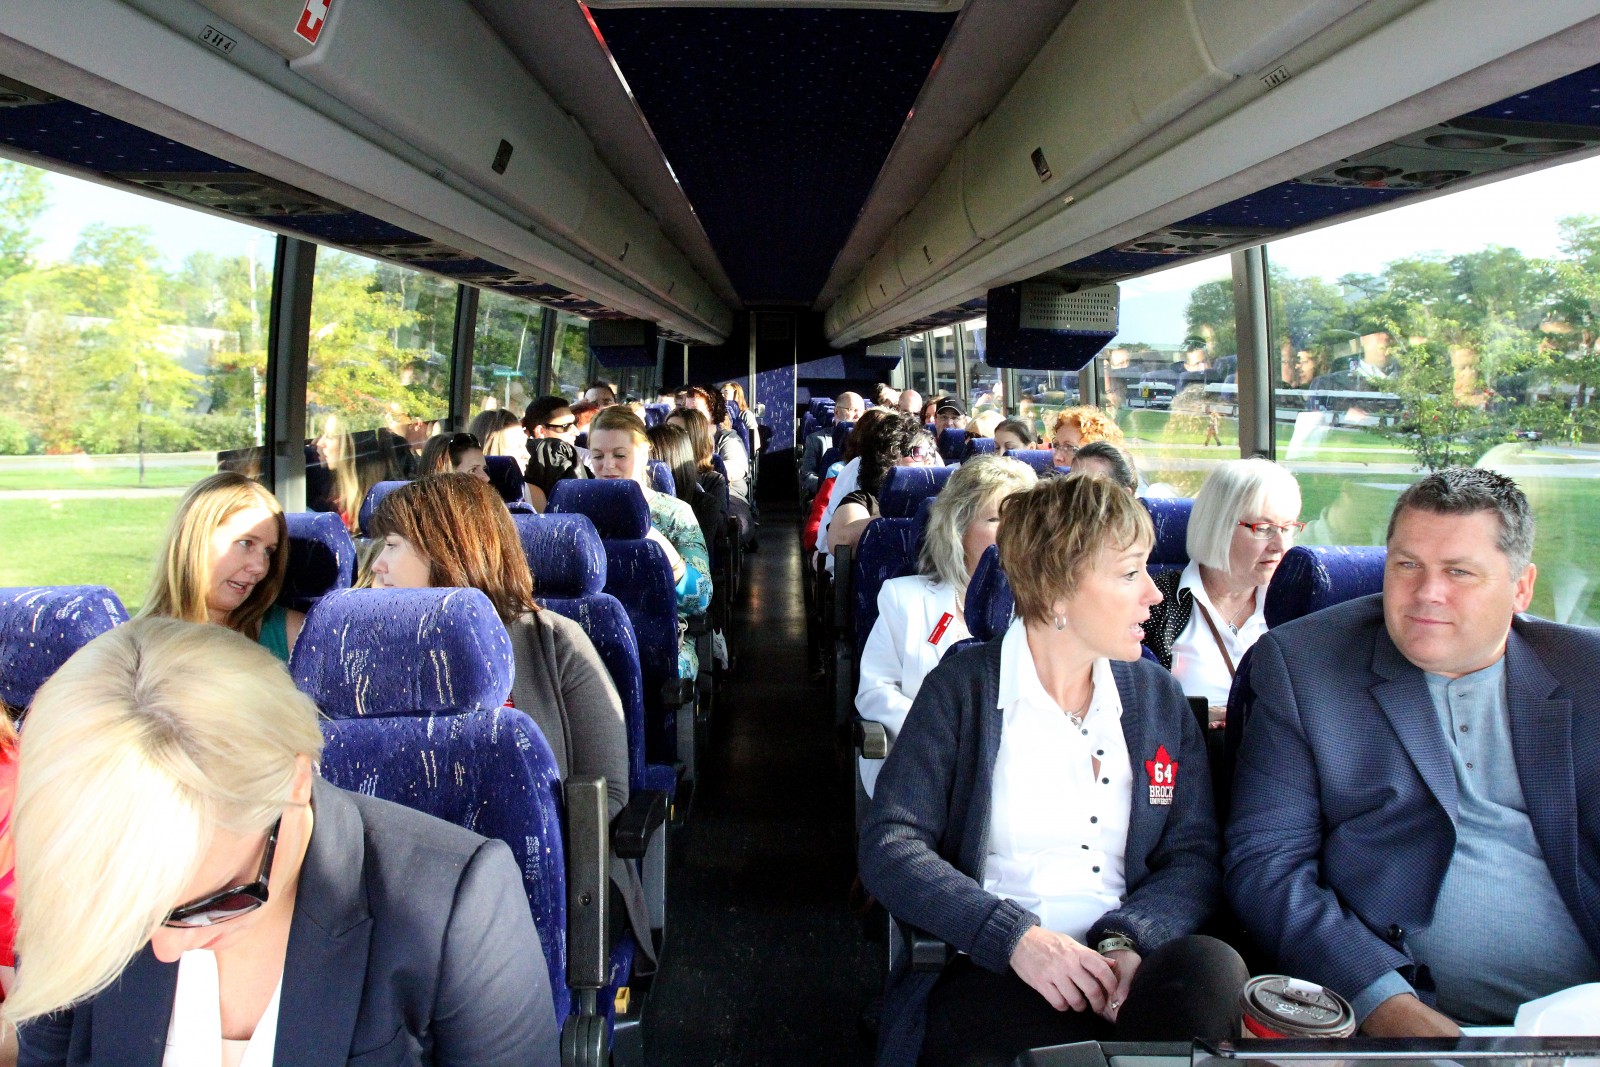 Faculty and staff filled a bus bound for Toronto and the Ontario University Fair Friday morning. Brock University will be showcasing its programs, services and campus life to high school students during the three-day event.